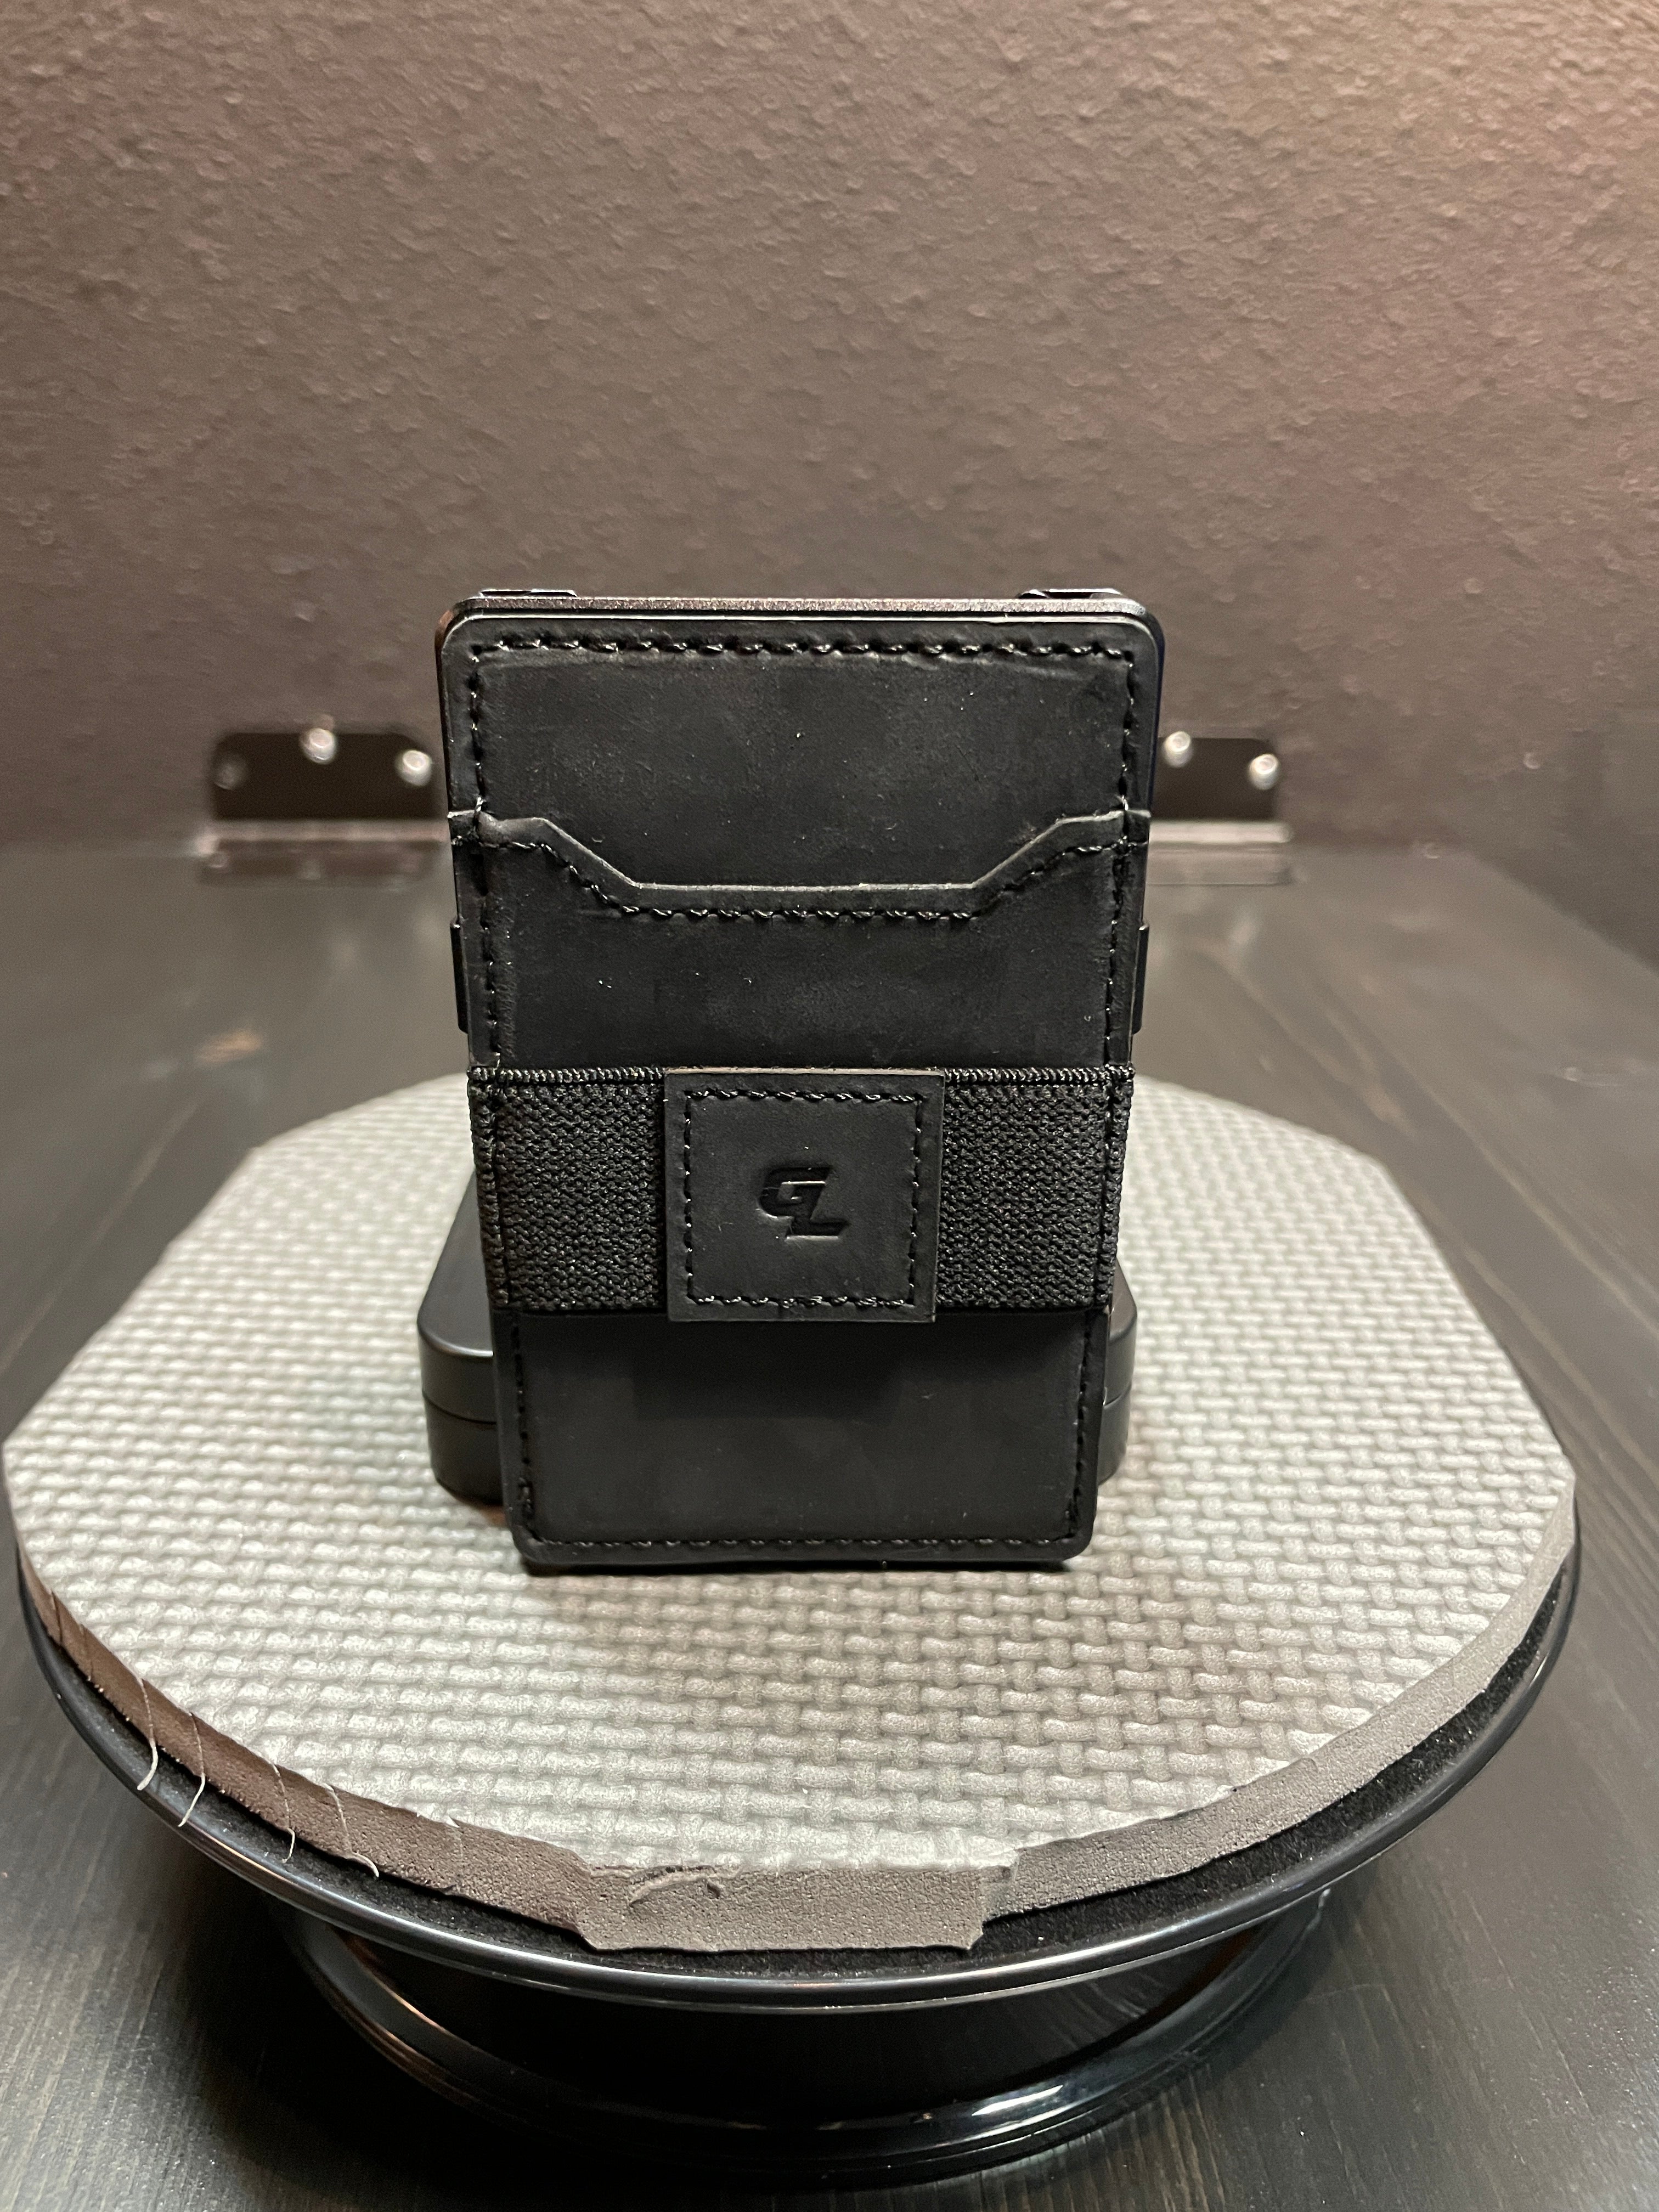 Groove Wallet - Midnight Black With Black Leather Card Holder